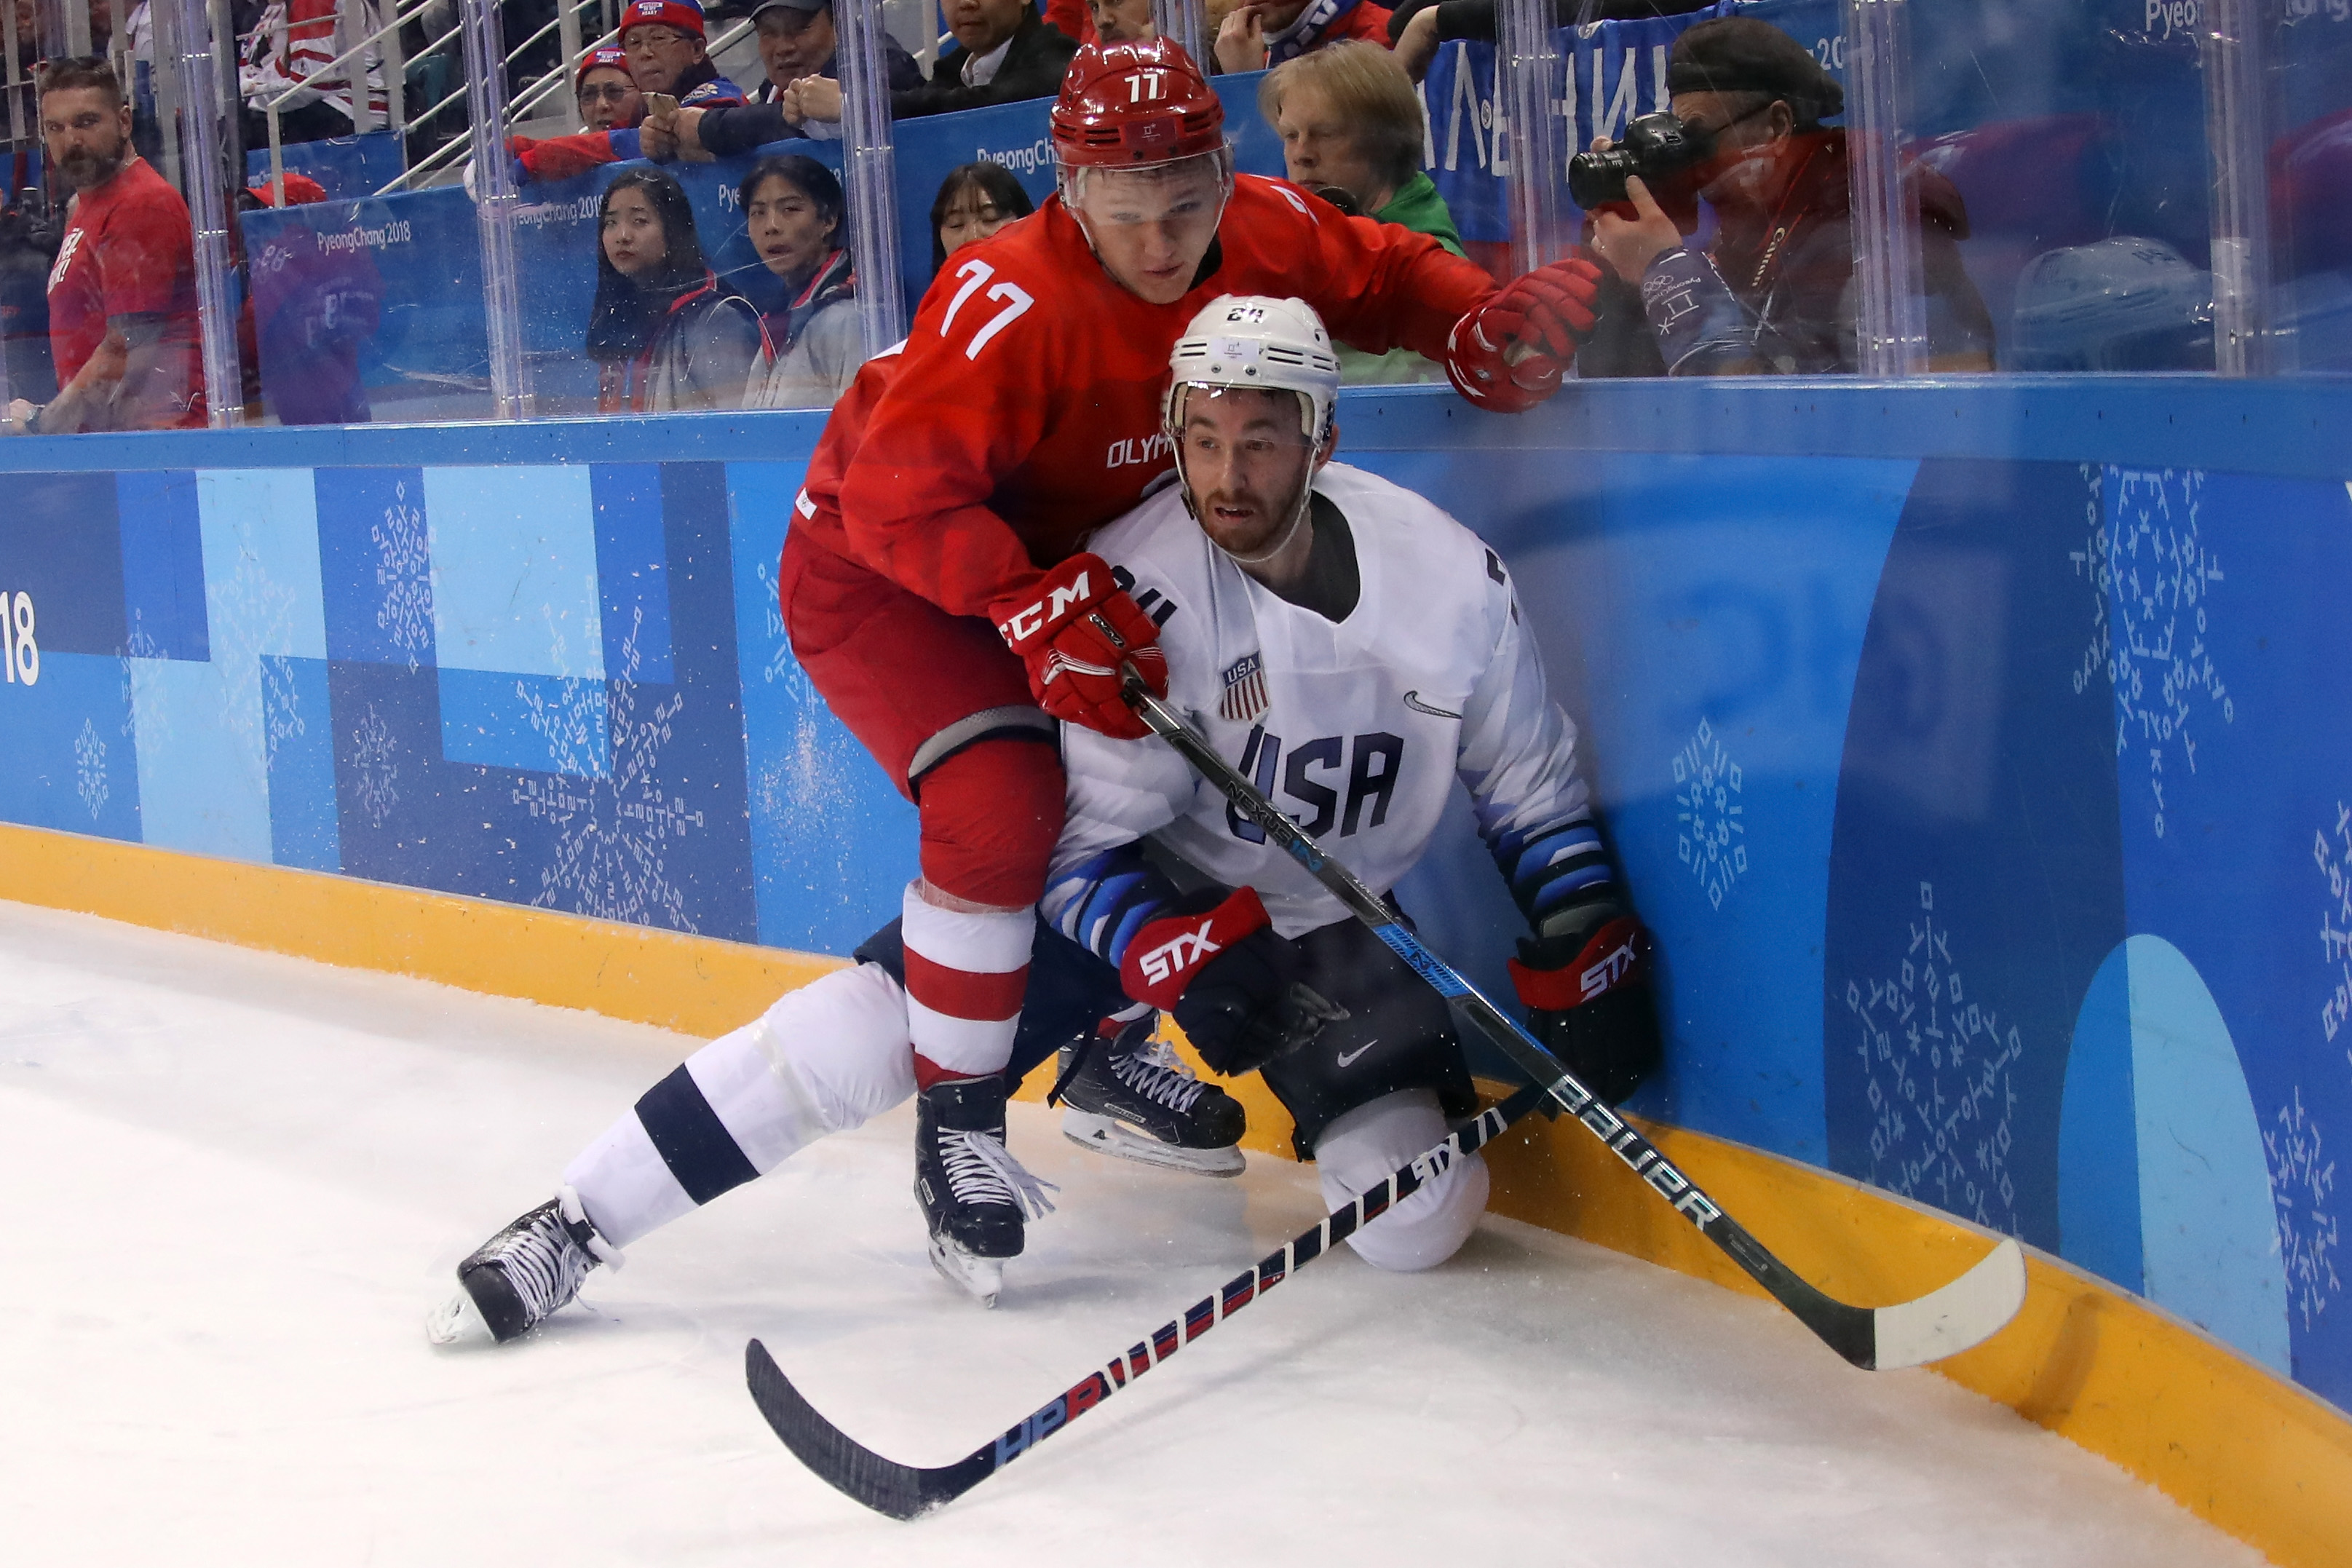 Jonathon Blum #24 of the United States gets knocked down against Kirill Kaprizov #77 of Olympic Athlete from Russia during the Men's Ice Hockey Preliminary Round Group B game on day eight of the PyeongChang 2018 Winter Olympic Games (Bruce Bennett – Getty Images)